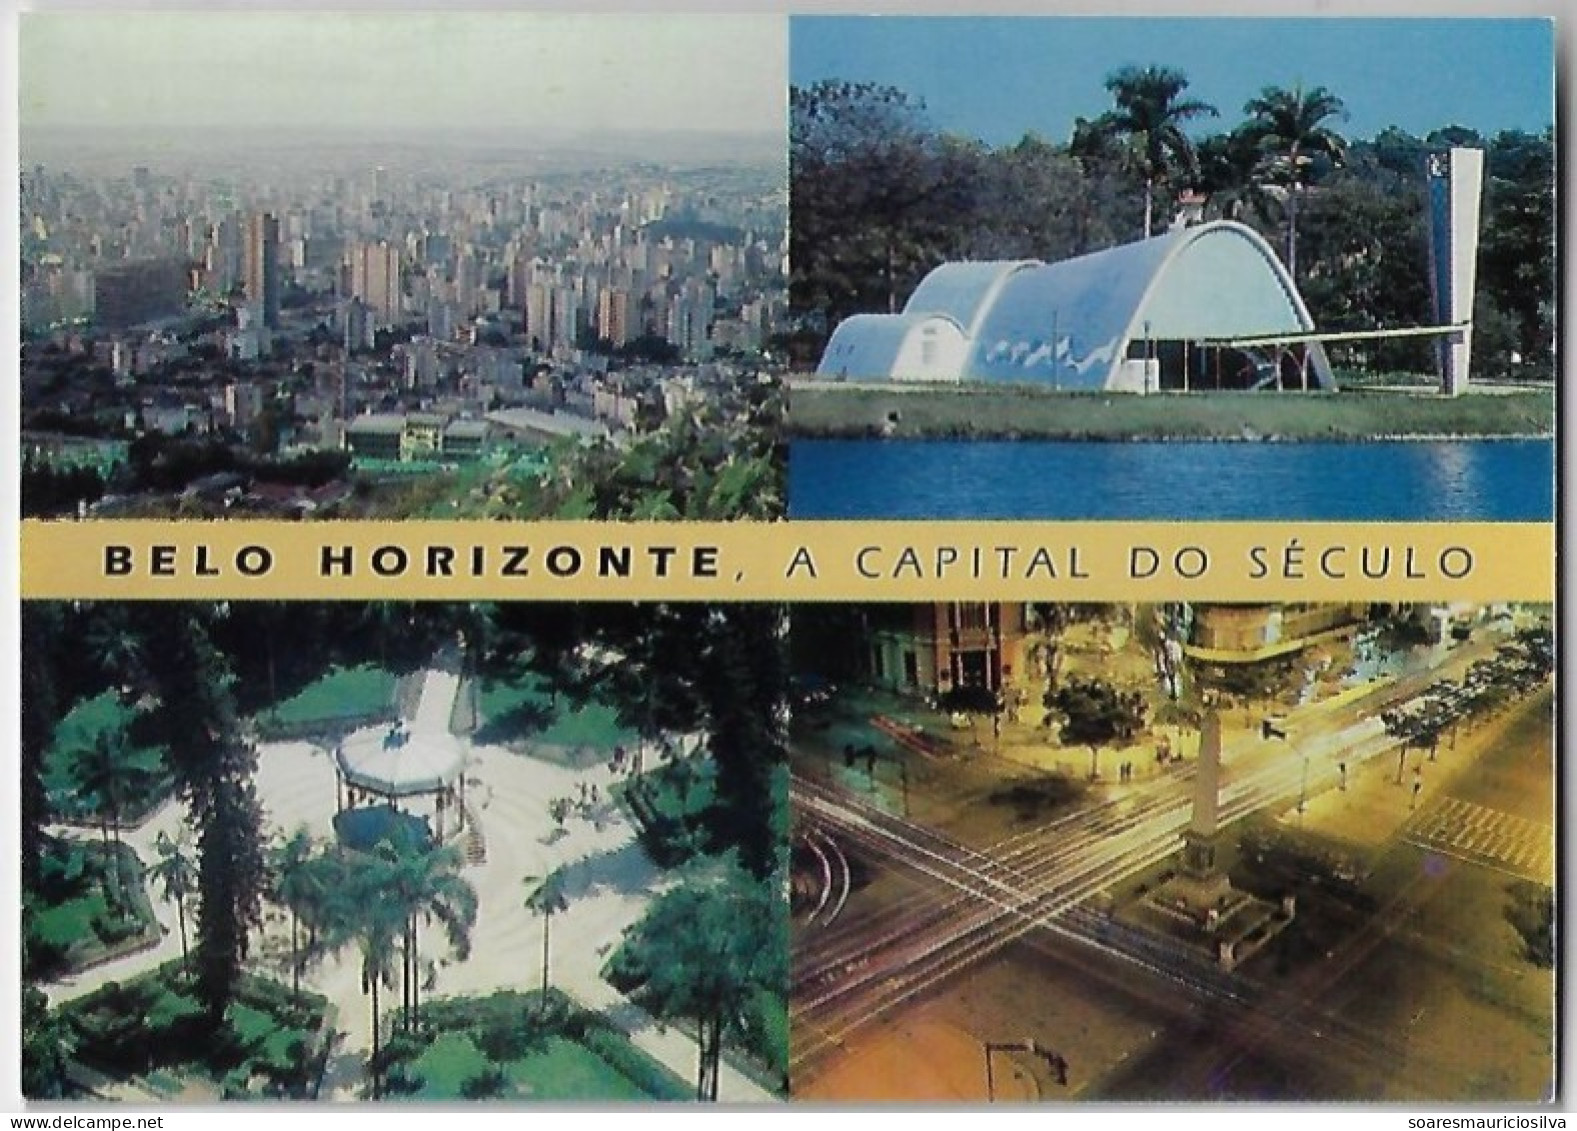 Brazil 1997 Postal Stationery Card Belo Horizonte The Capital Of The Century Church Saint Francis Of Assisi Park Square - Enteros Postales